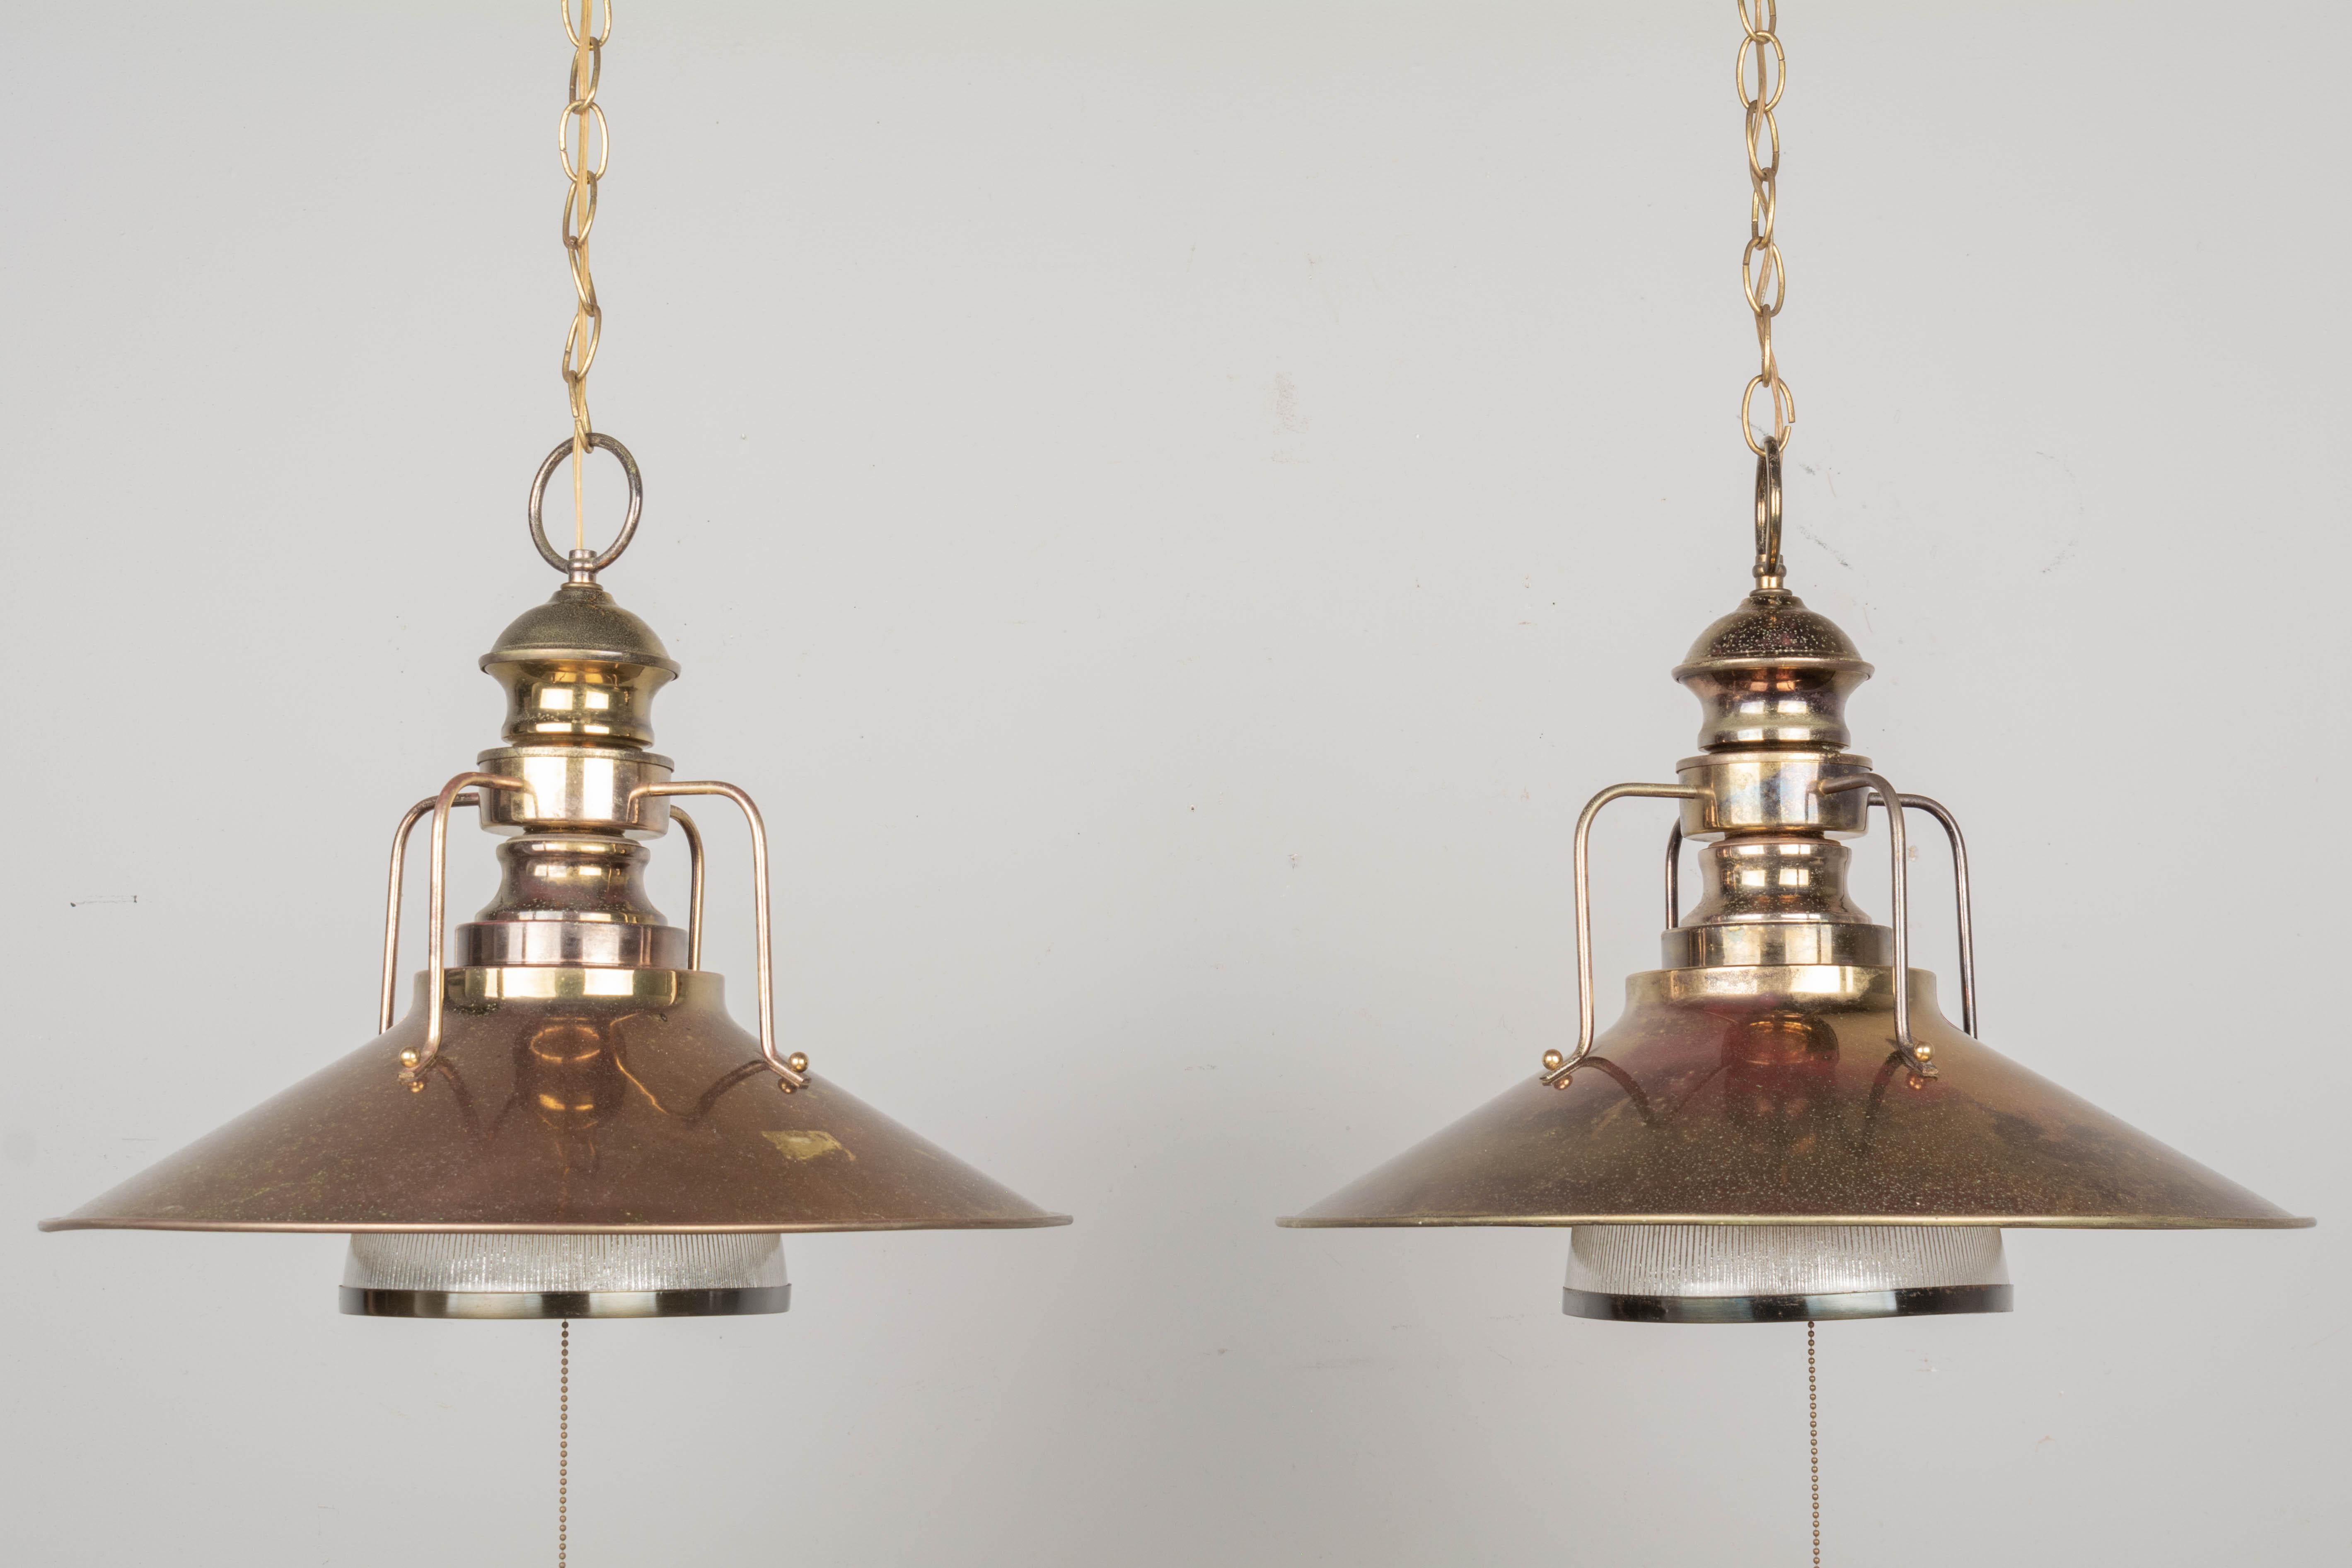 American Industrial Railway Station Pendant Lights, a Pair